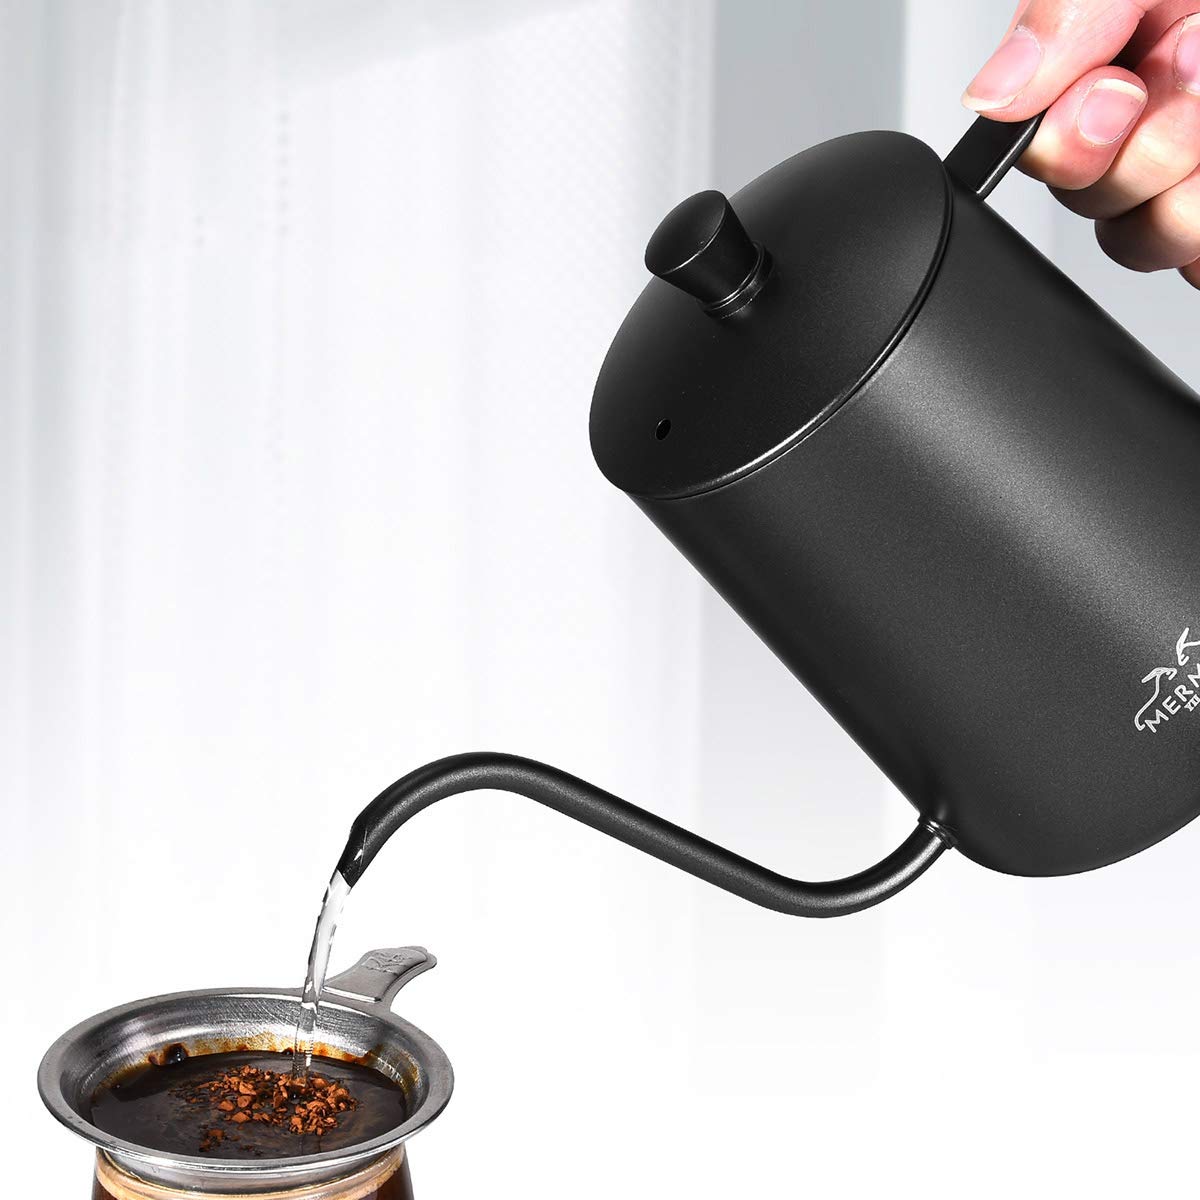 MERMOO YILAN Gooseneck Coffee Kettle 21oz Pour Over Drip Pot 600ml Long Narrow Spout Stainless Steel Water Dripper Kettle for Tea & Coffee(Silver)